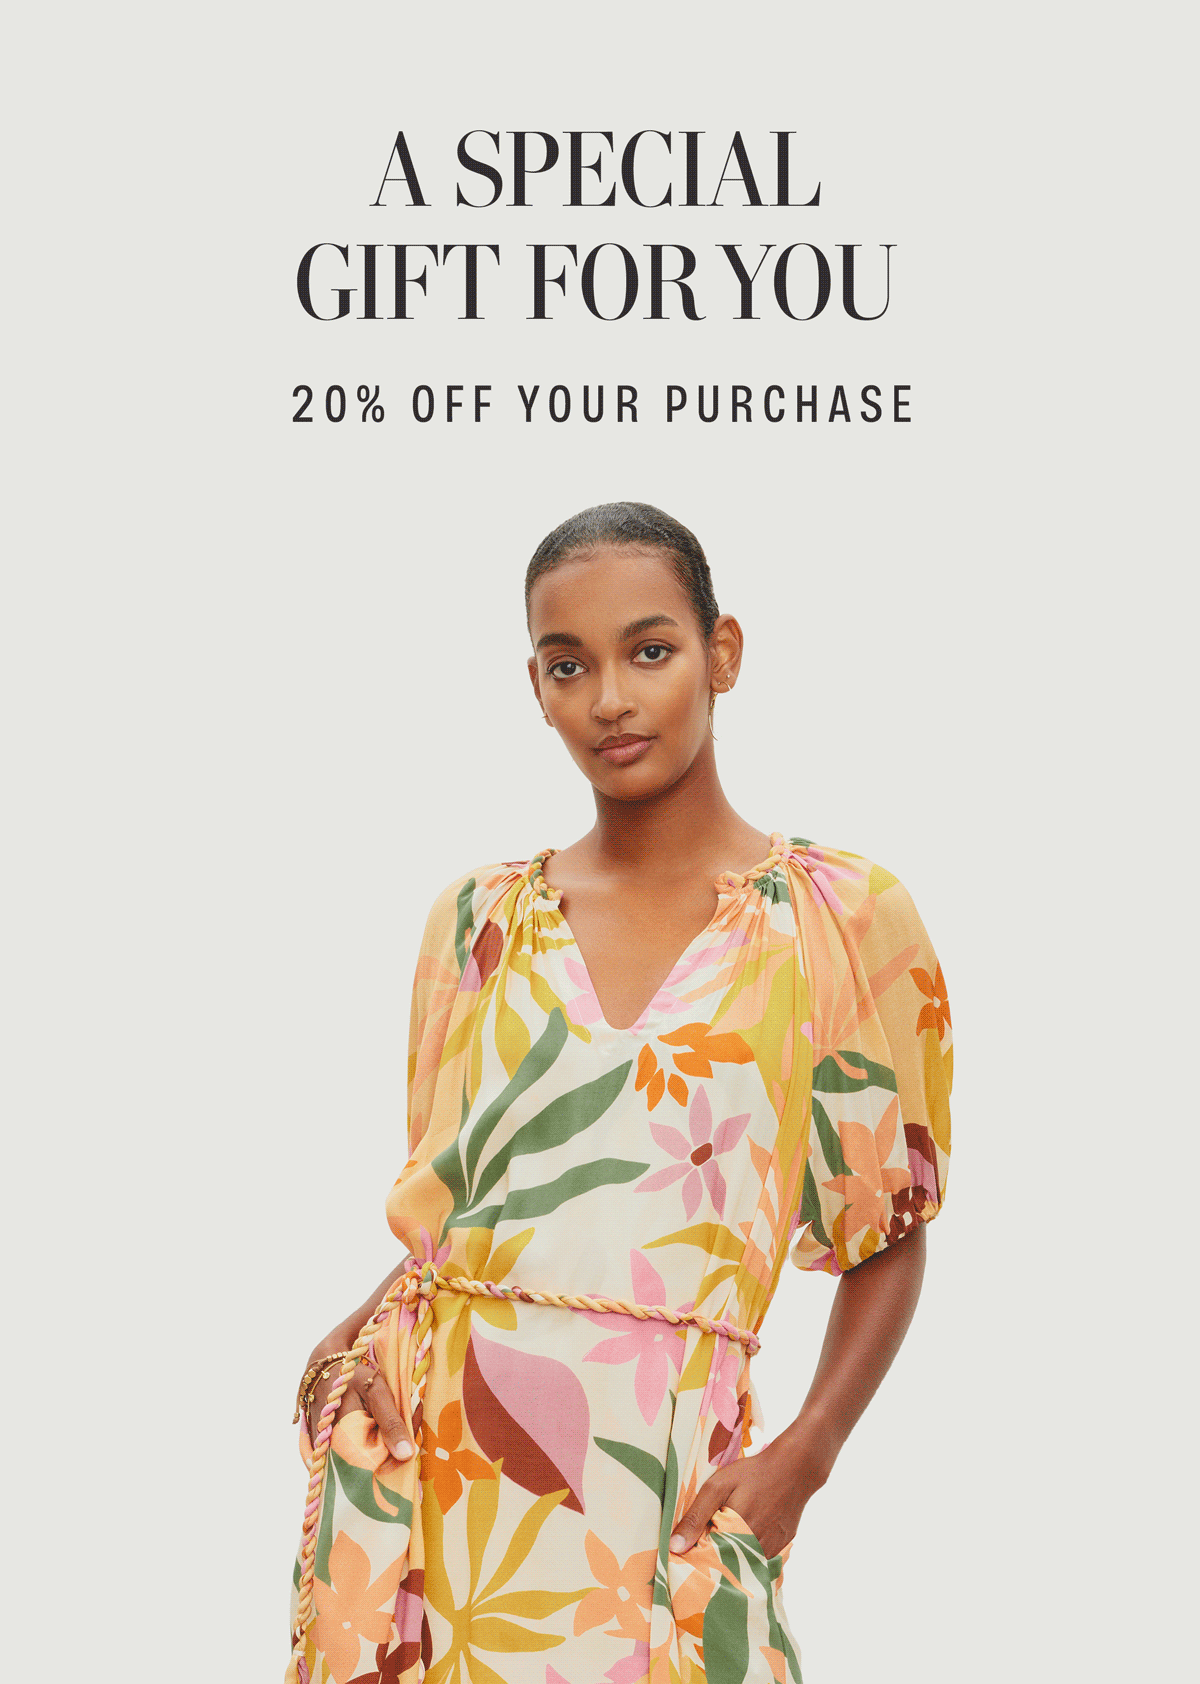 A SPECIAL GIFT FOR YOU! 20% OFF YOUR PURCHASE